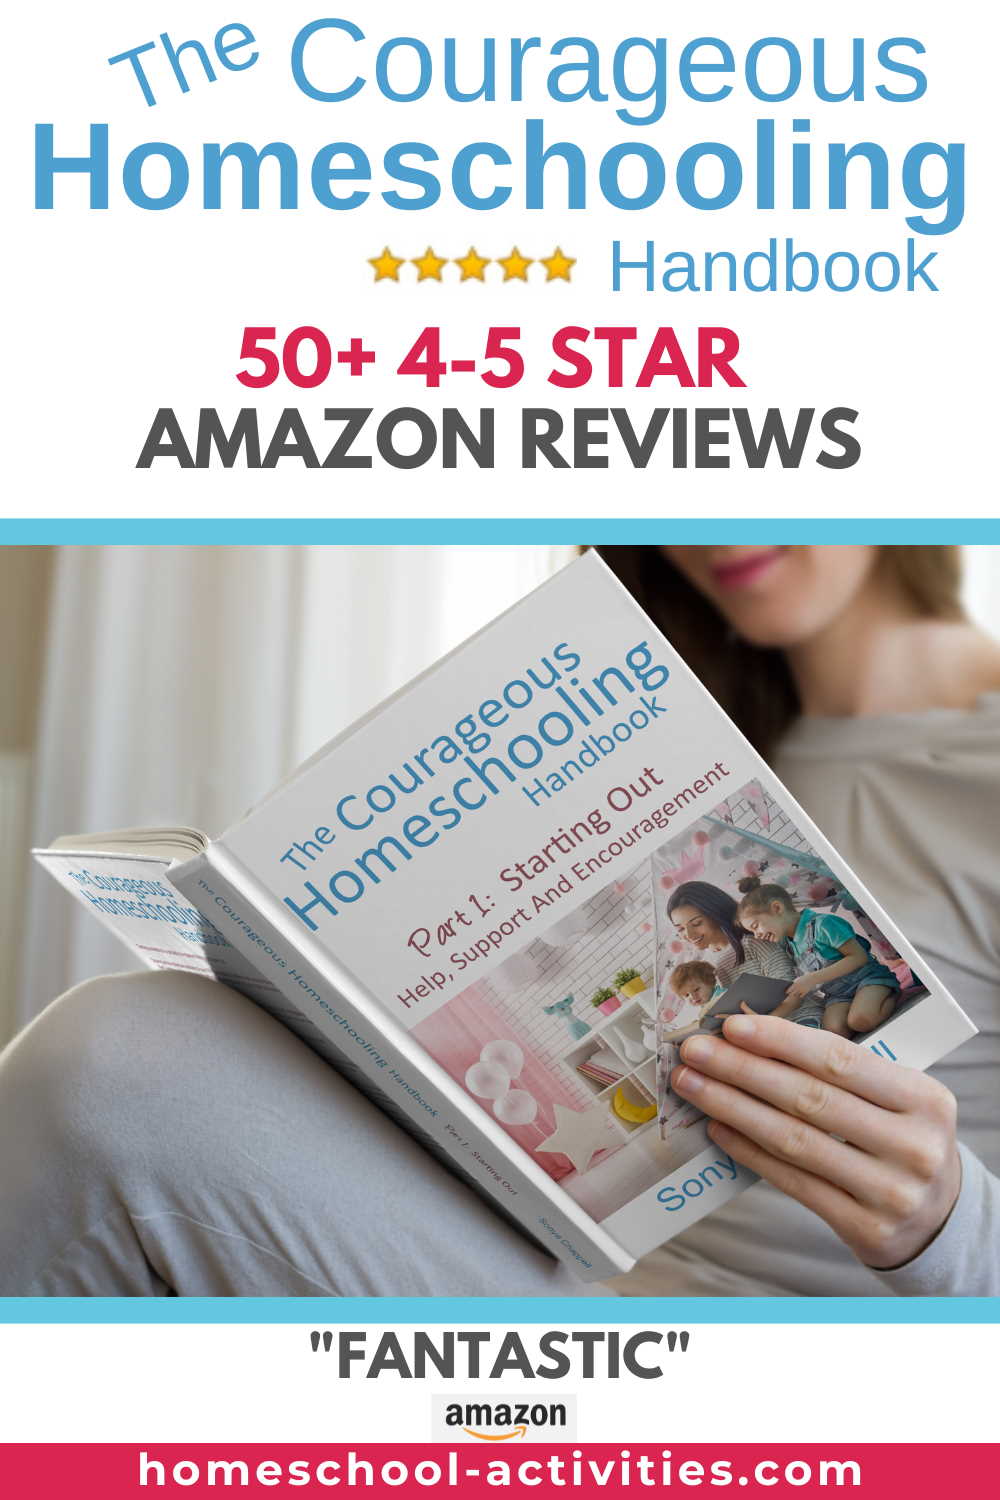 The Courageous Homeschooling Handbook with 50 4-5 star Amazon reviews shares advice from the largest group of homeschooling families ever collected together to help you homeschool successfully.